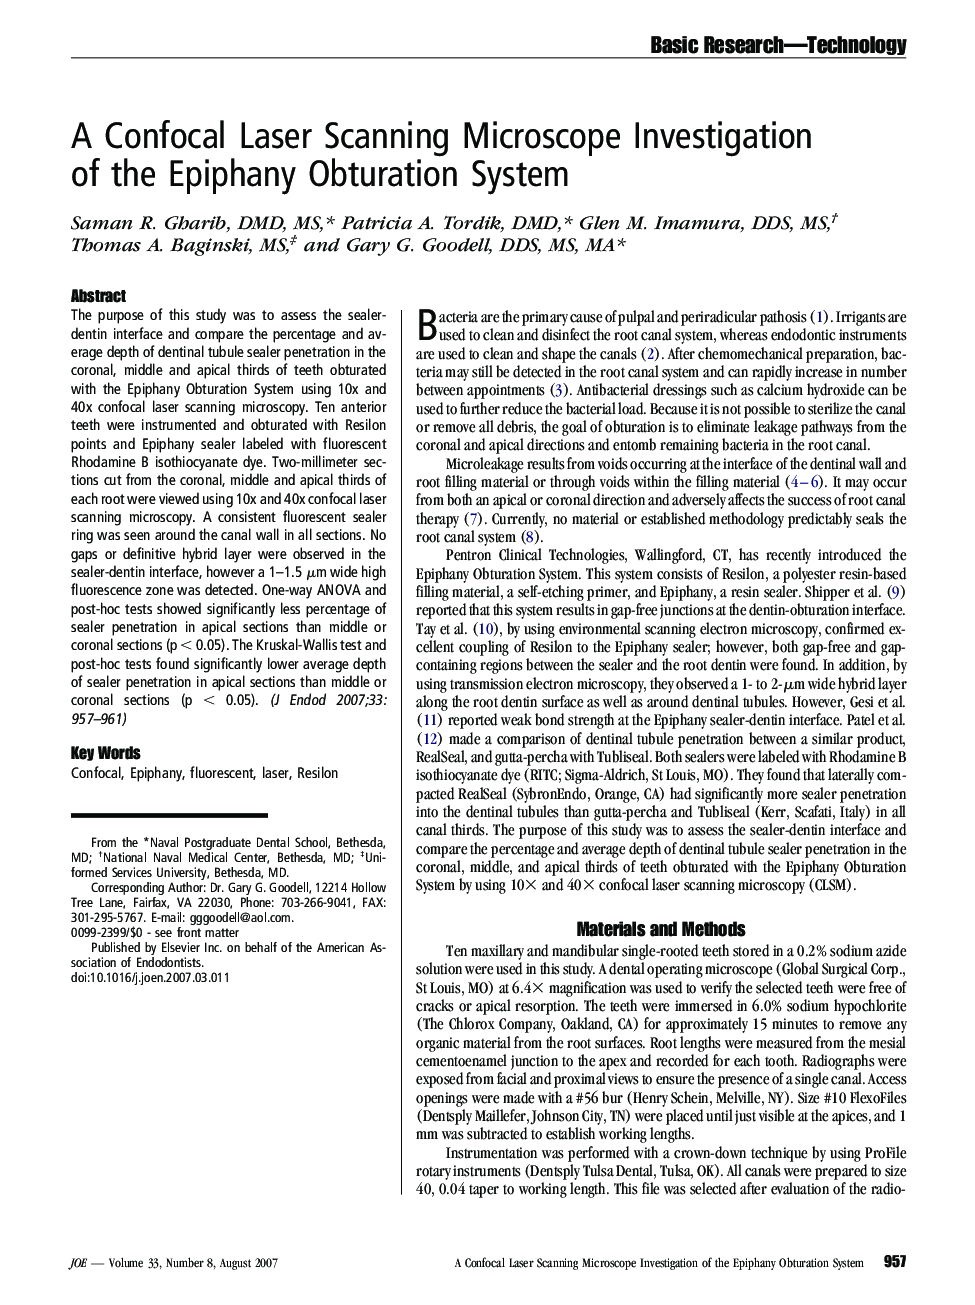 A Confocal Laser Scanning Microscope Investigation of the Epiphany Obturation System